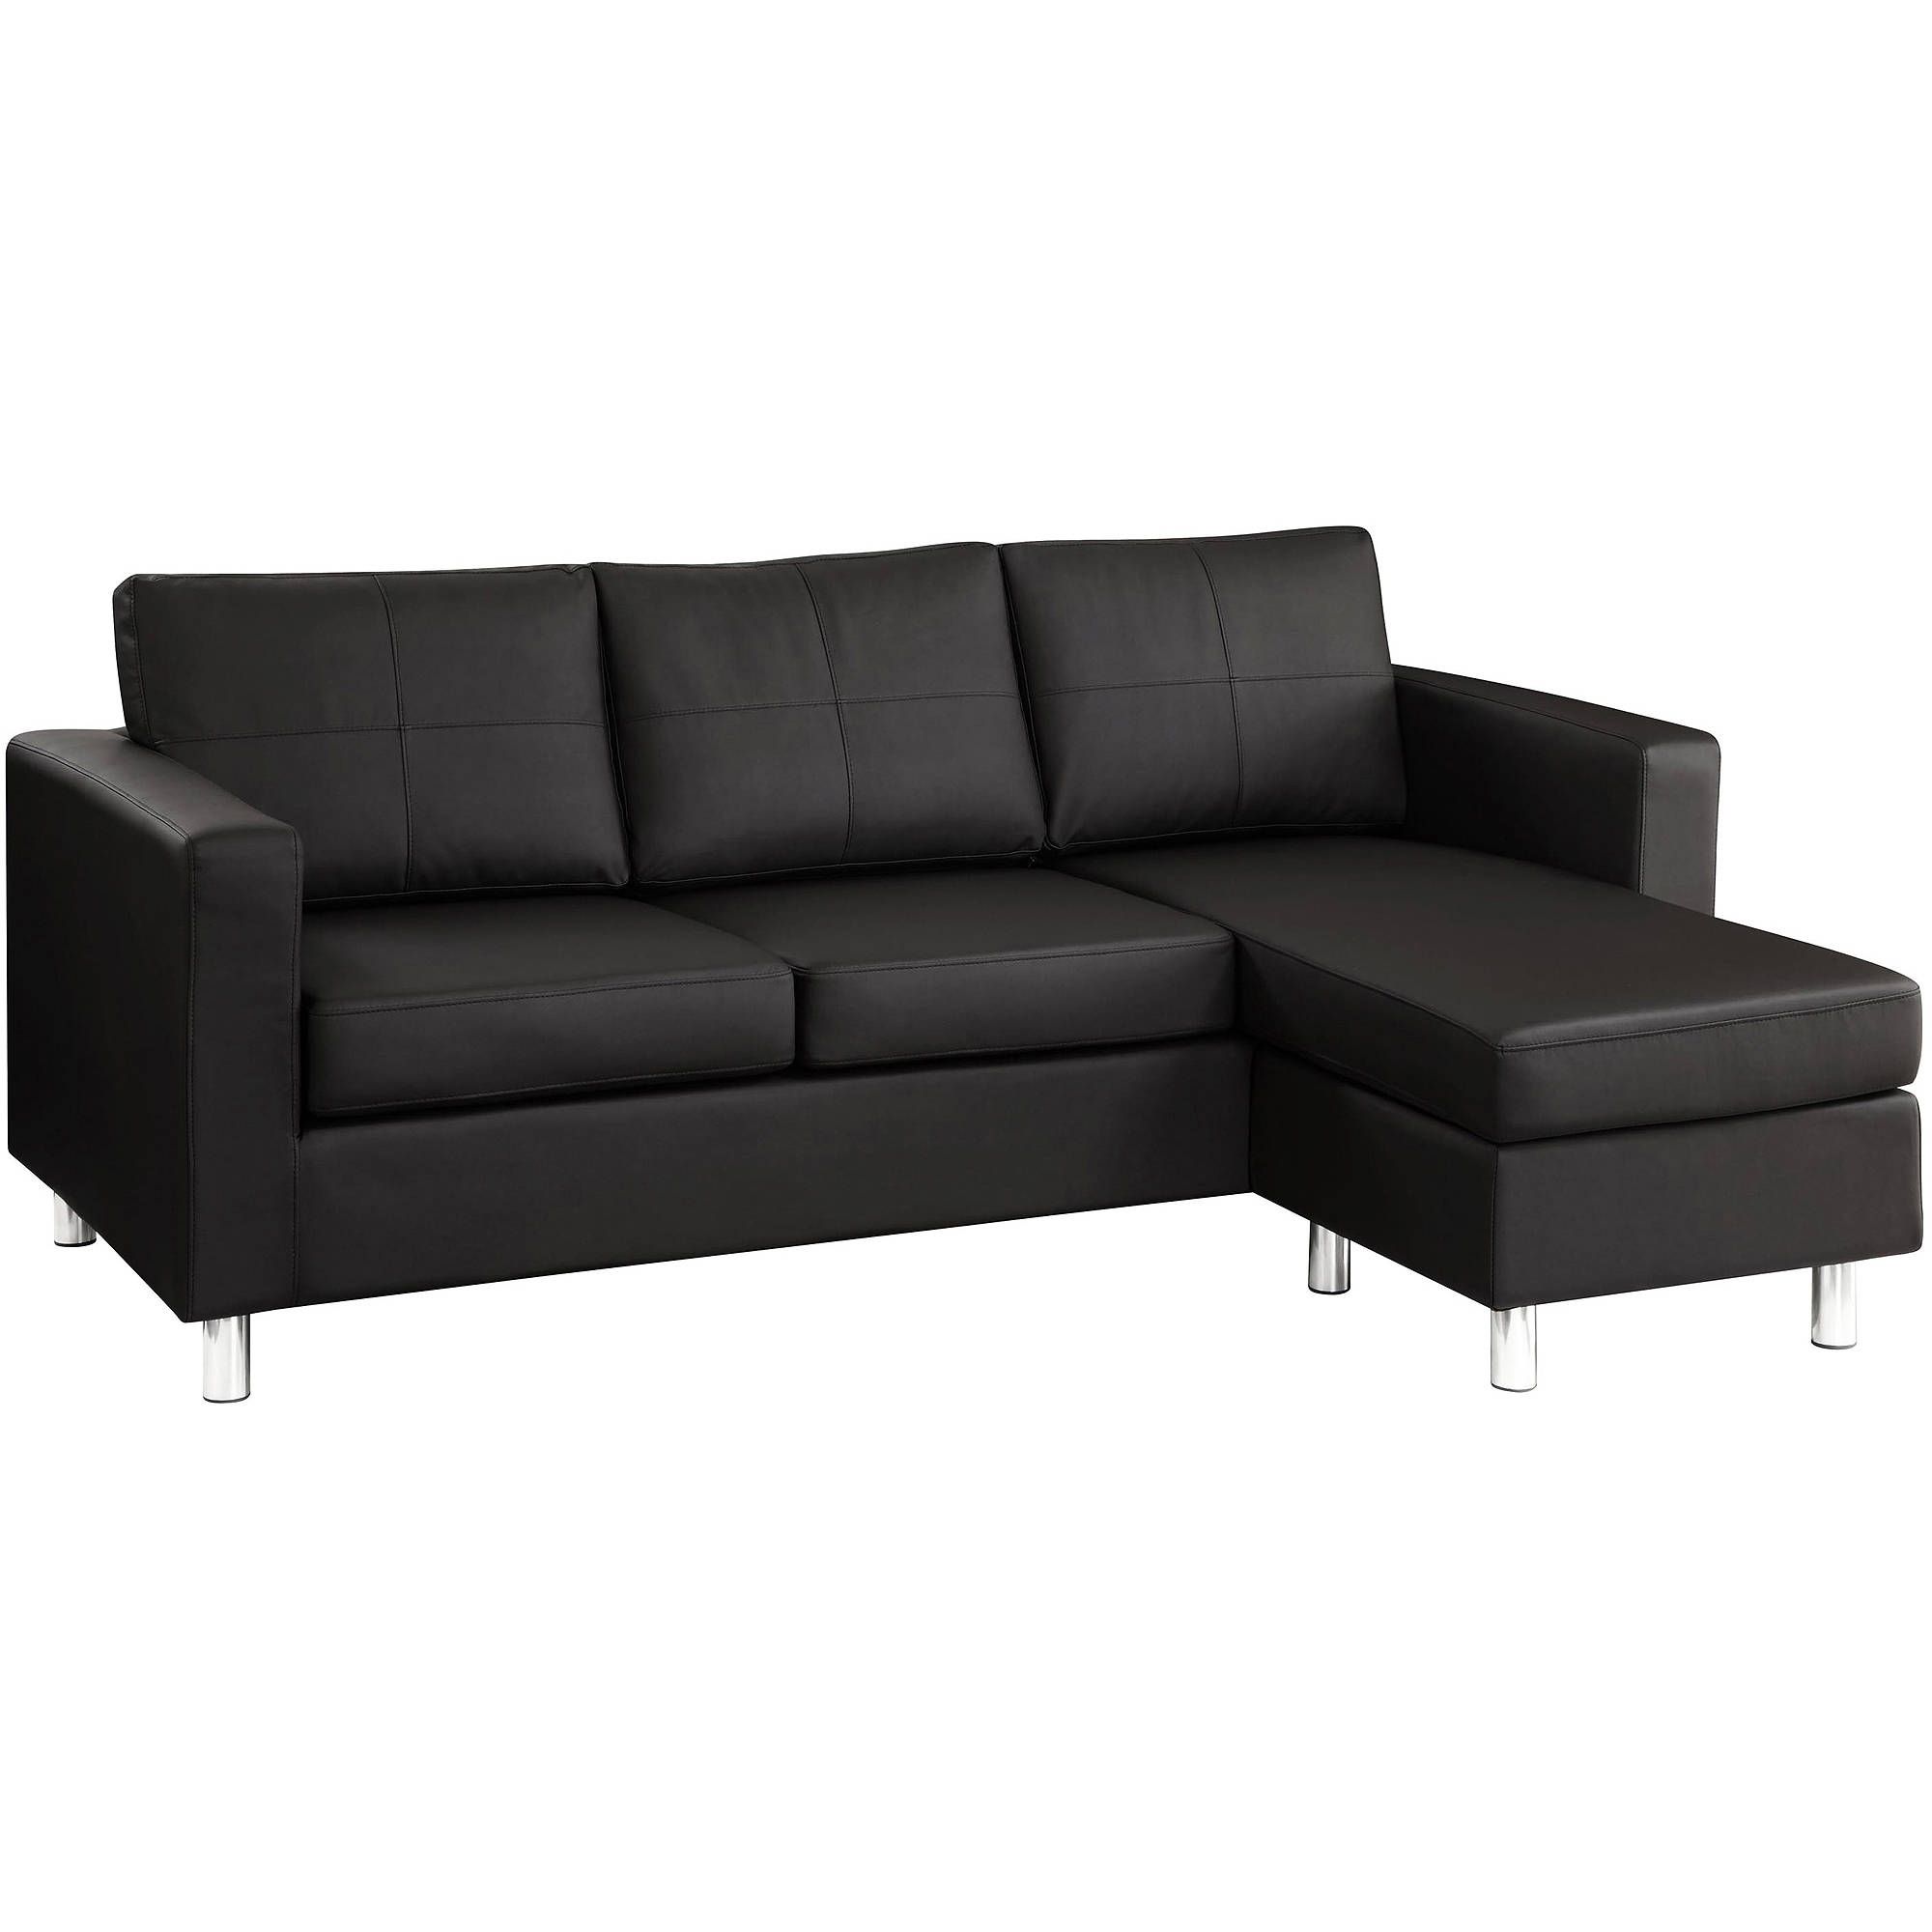 Sectional Sofa Design: Amazing Small Sectionals Sofas Small Throughout Well Liked Chaise Sectionals (View 12 of 15)